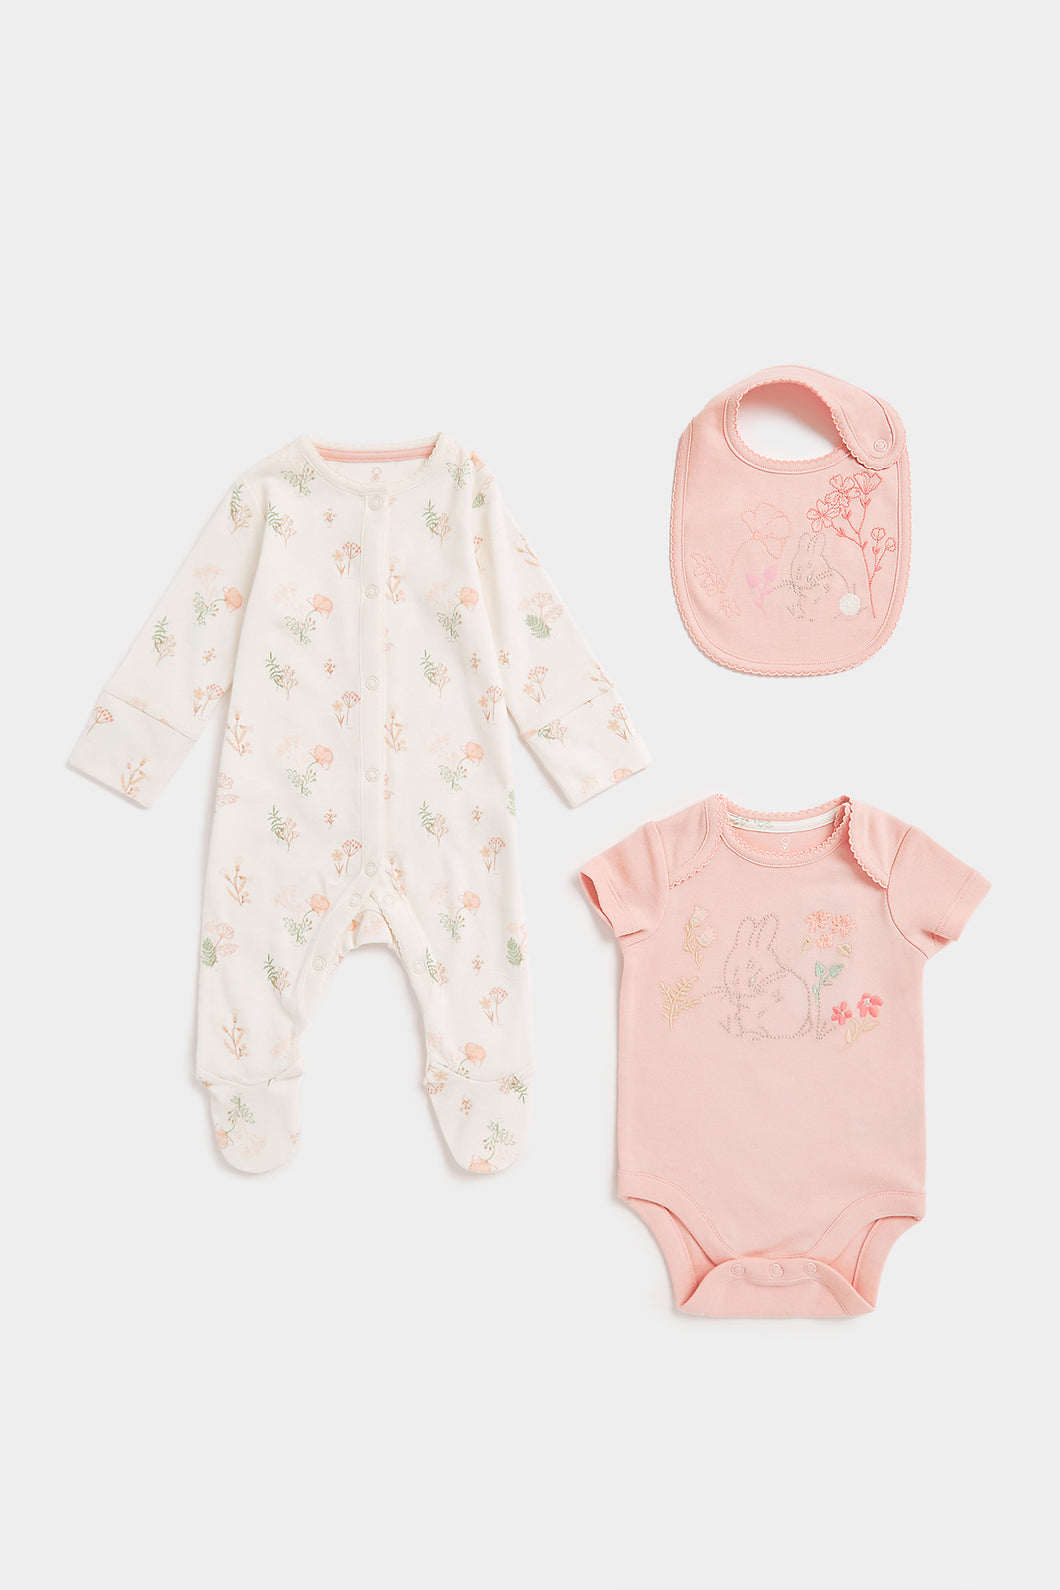 Mothercare My First All-In-One, Bodysuit And Bib Set